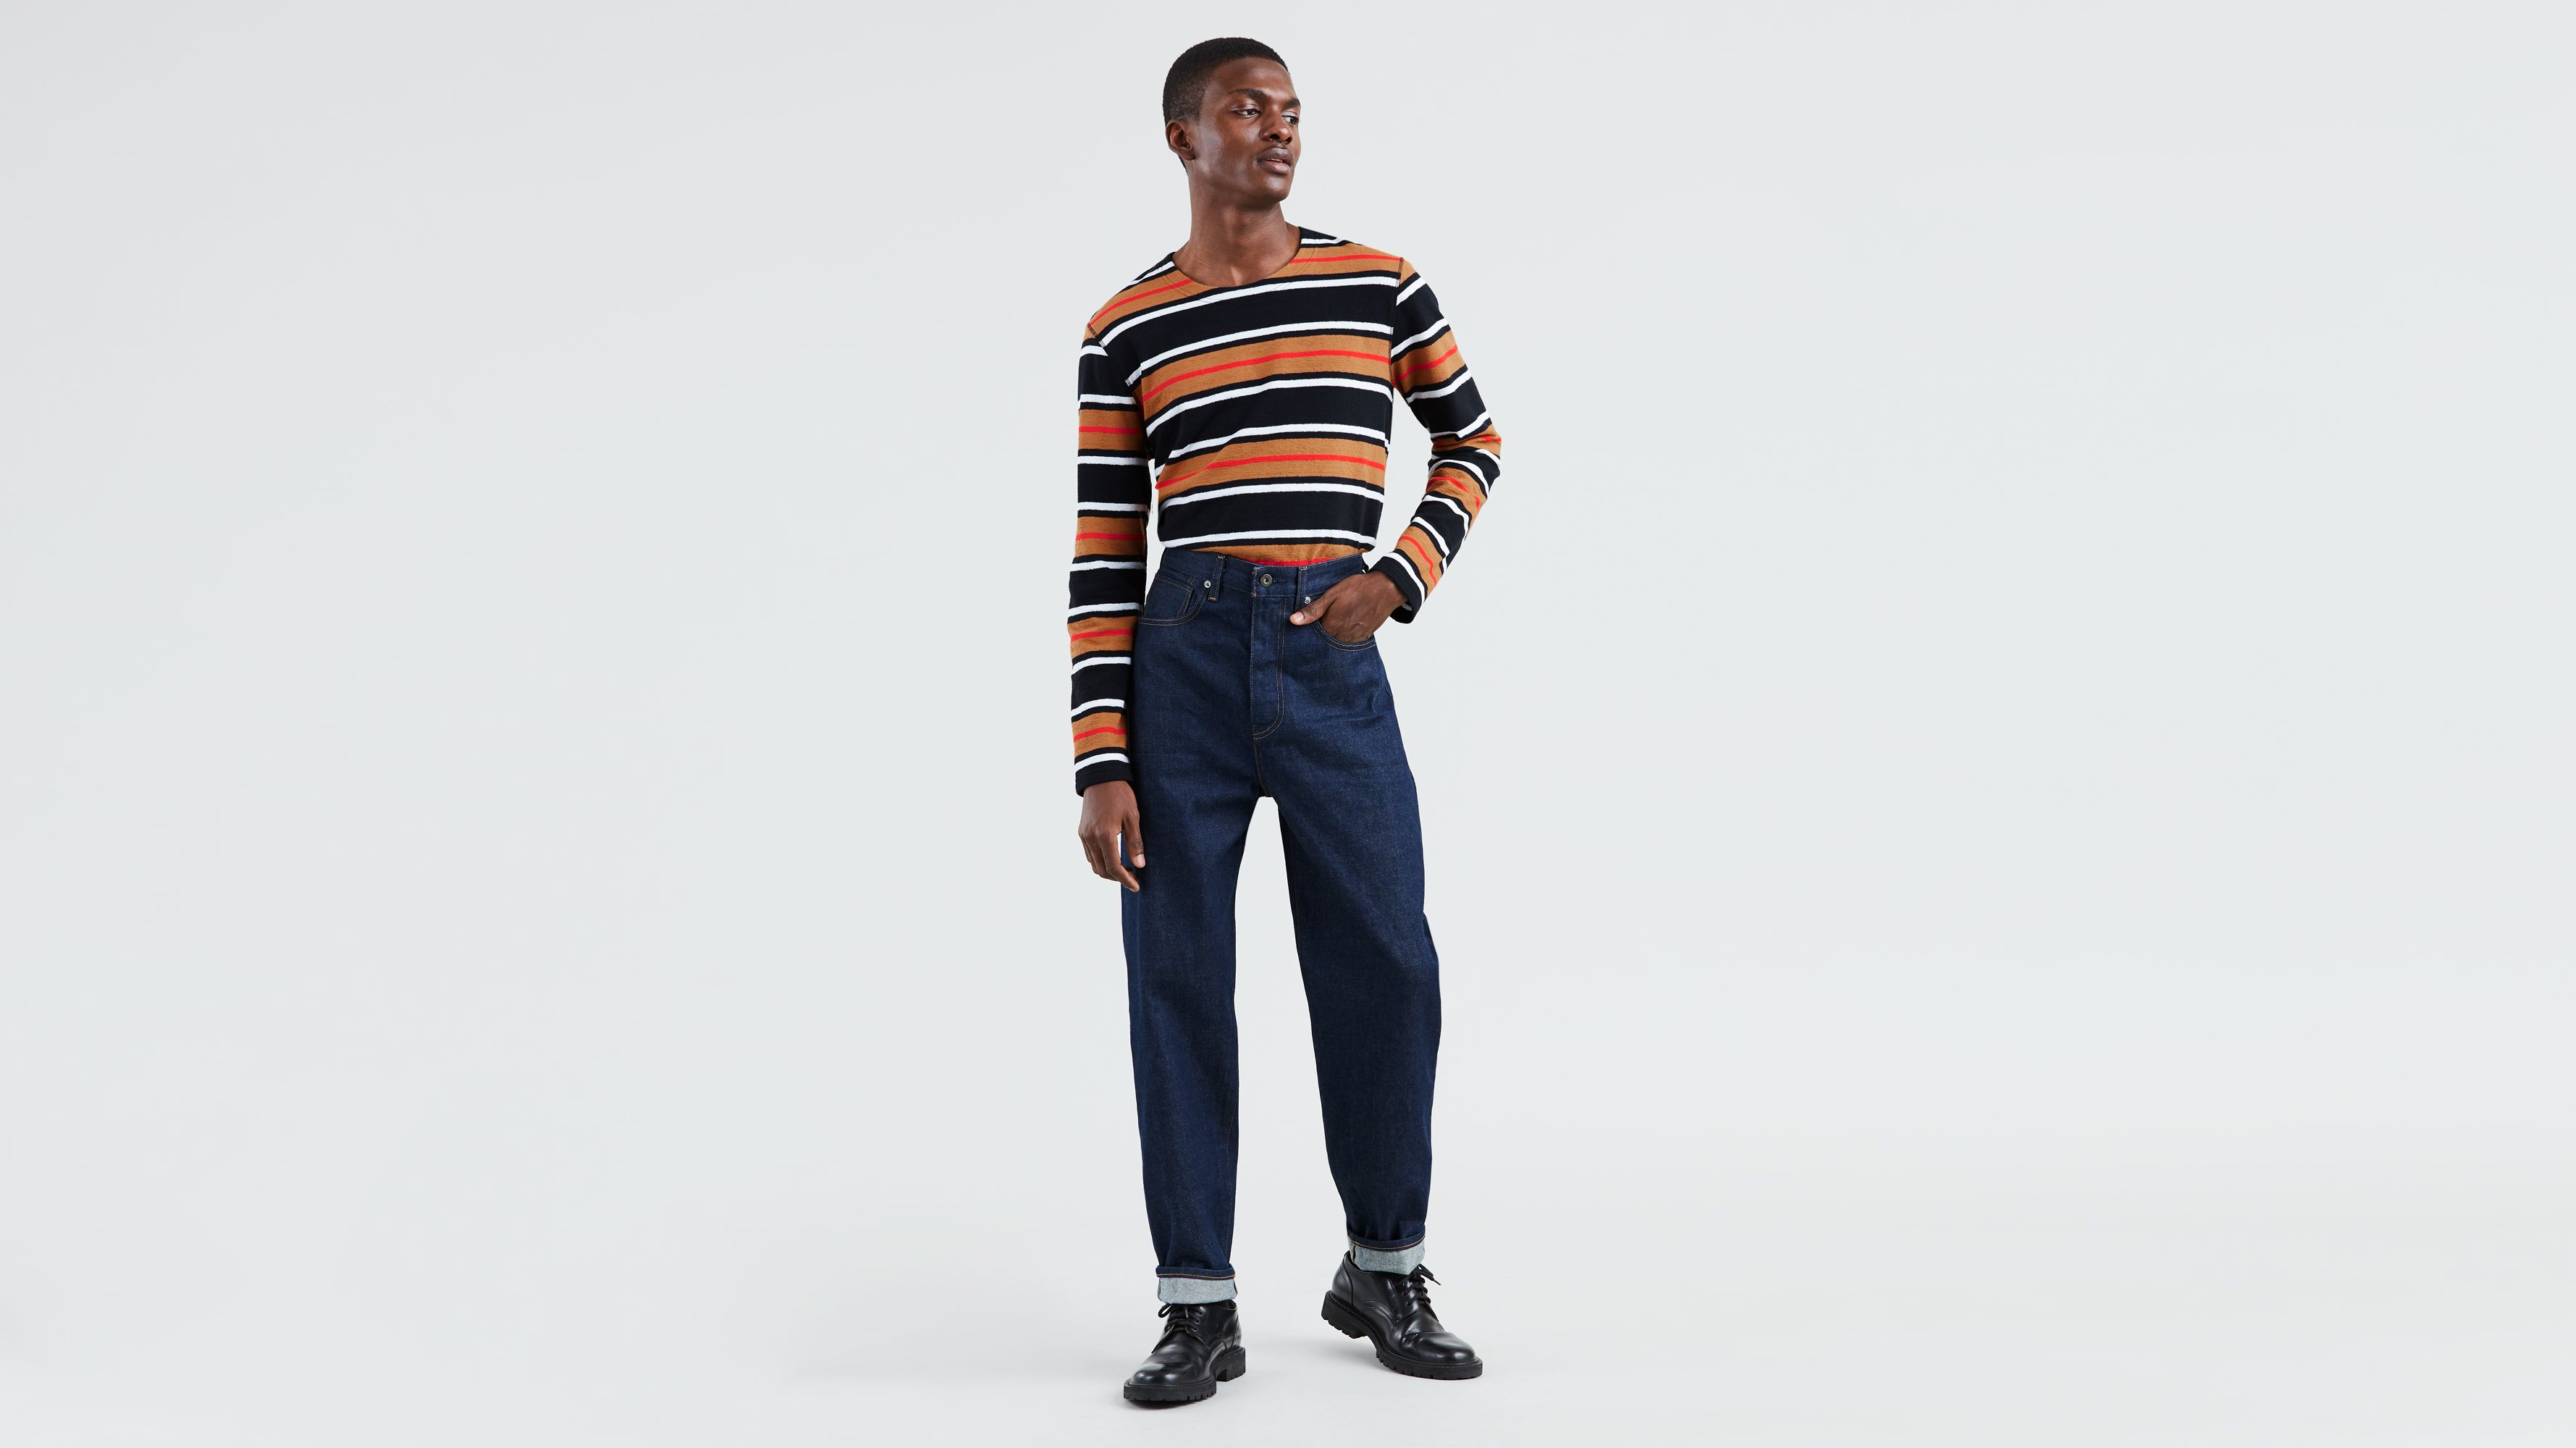 levi's mid rise straight jeans